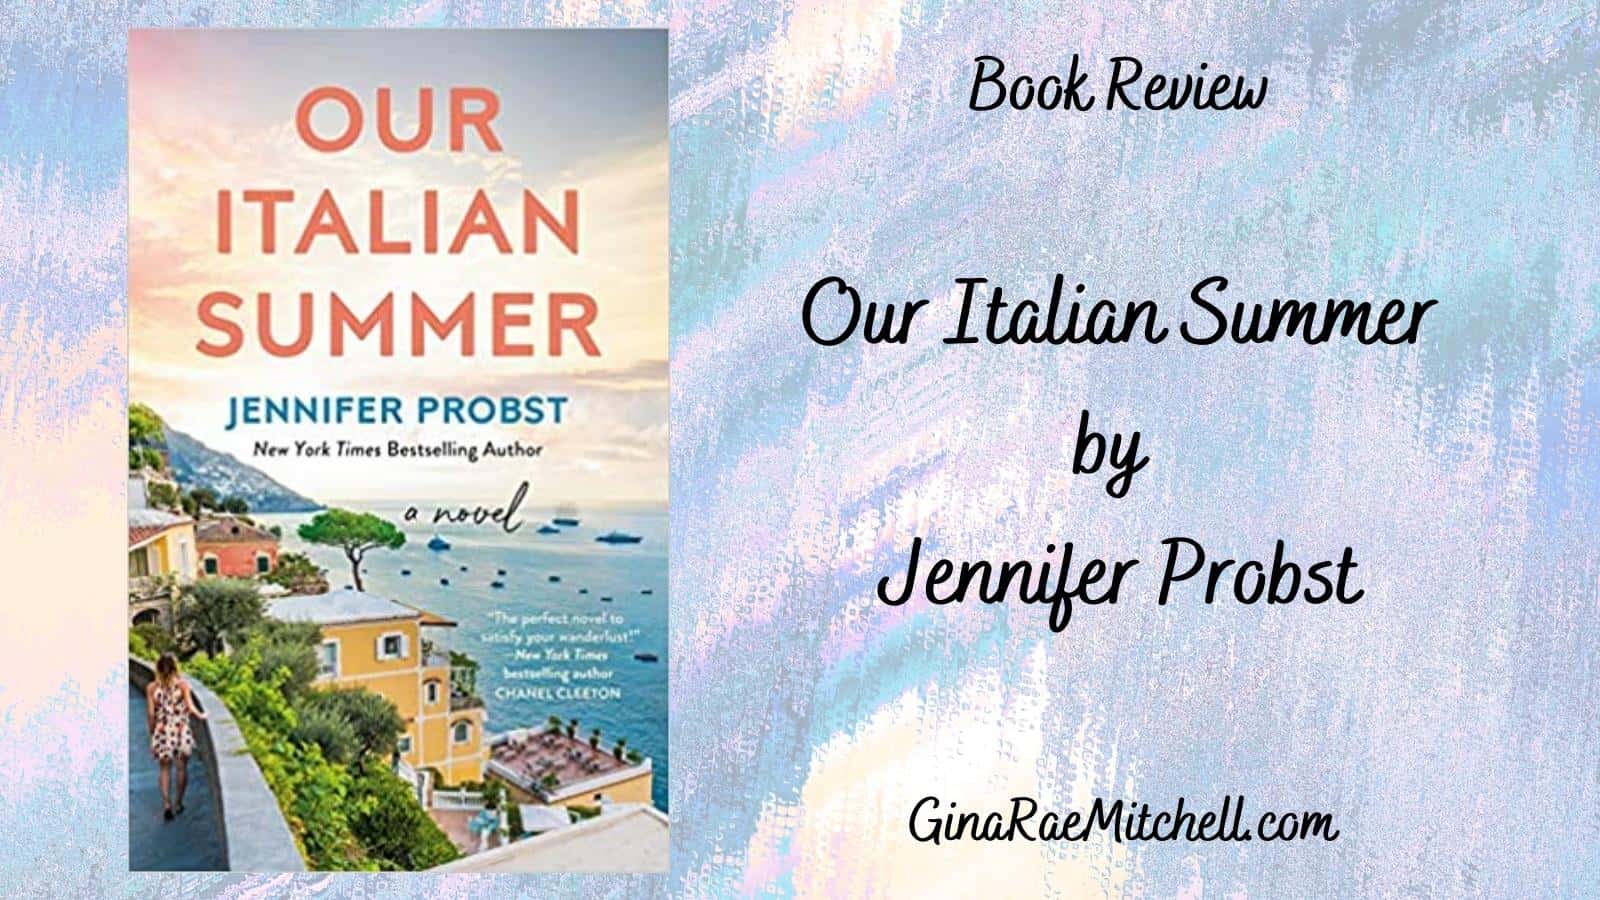 Our Italian Summer by Jennifer Probst | Review | 5-Star, Incredible Story